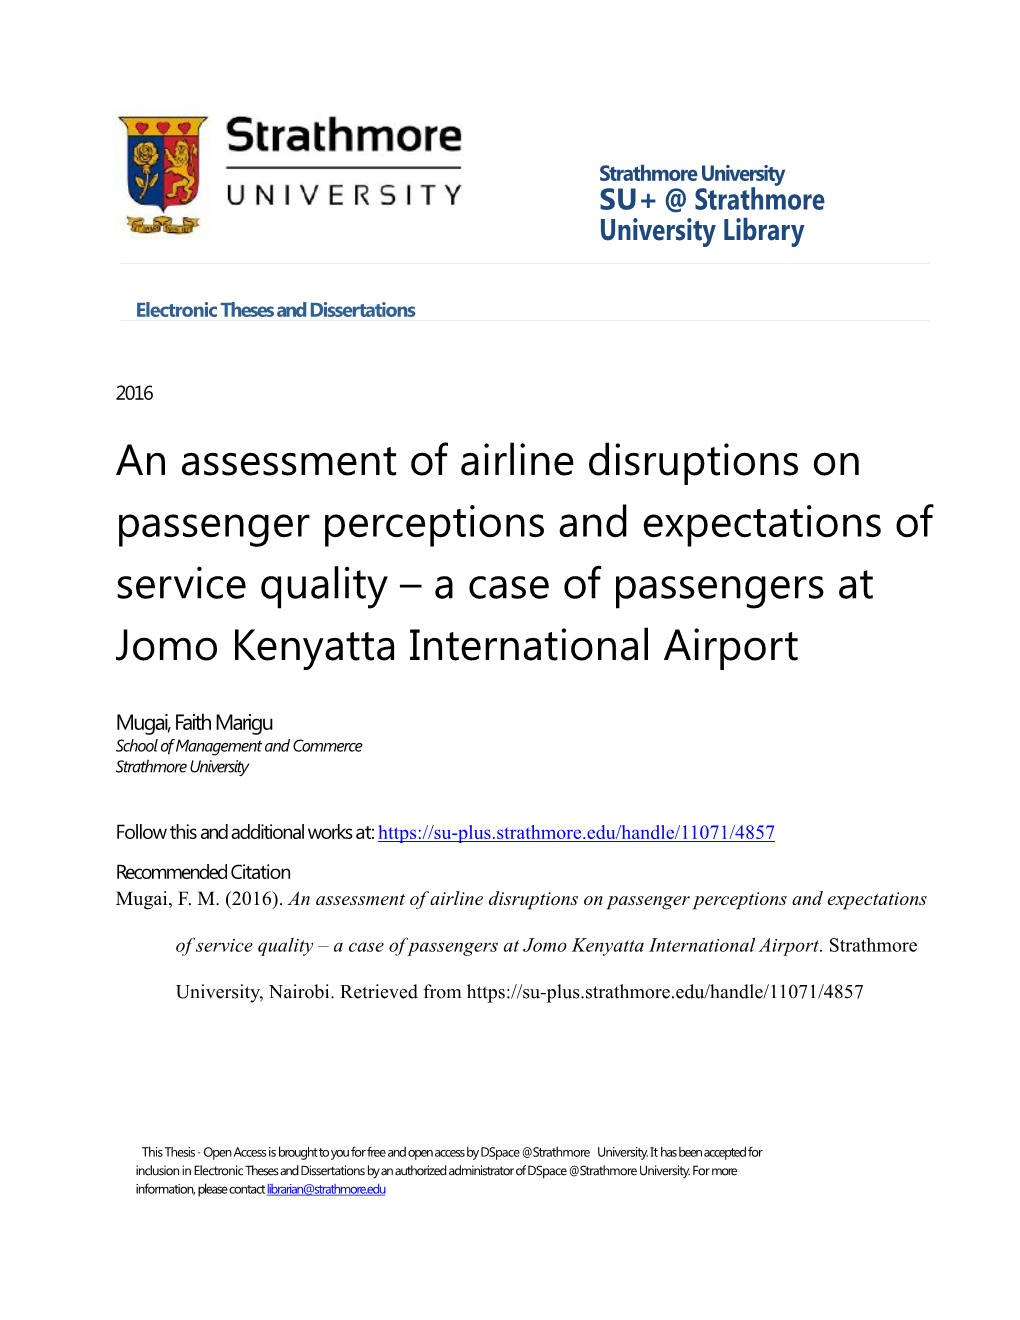 An Assessment of Airline Disruptions on Passenger Perceptions and Expectations of Service Quality – a Case of Passengers at Jomo Kenyatta International Airport